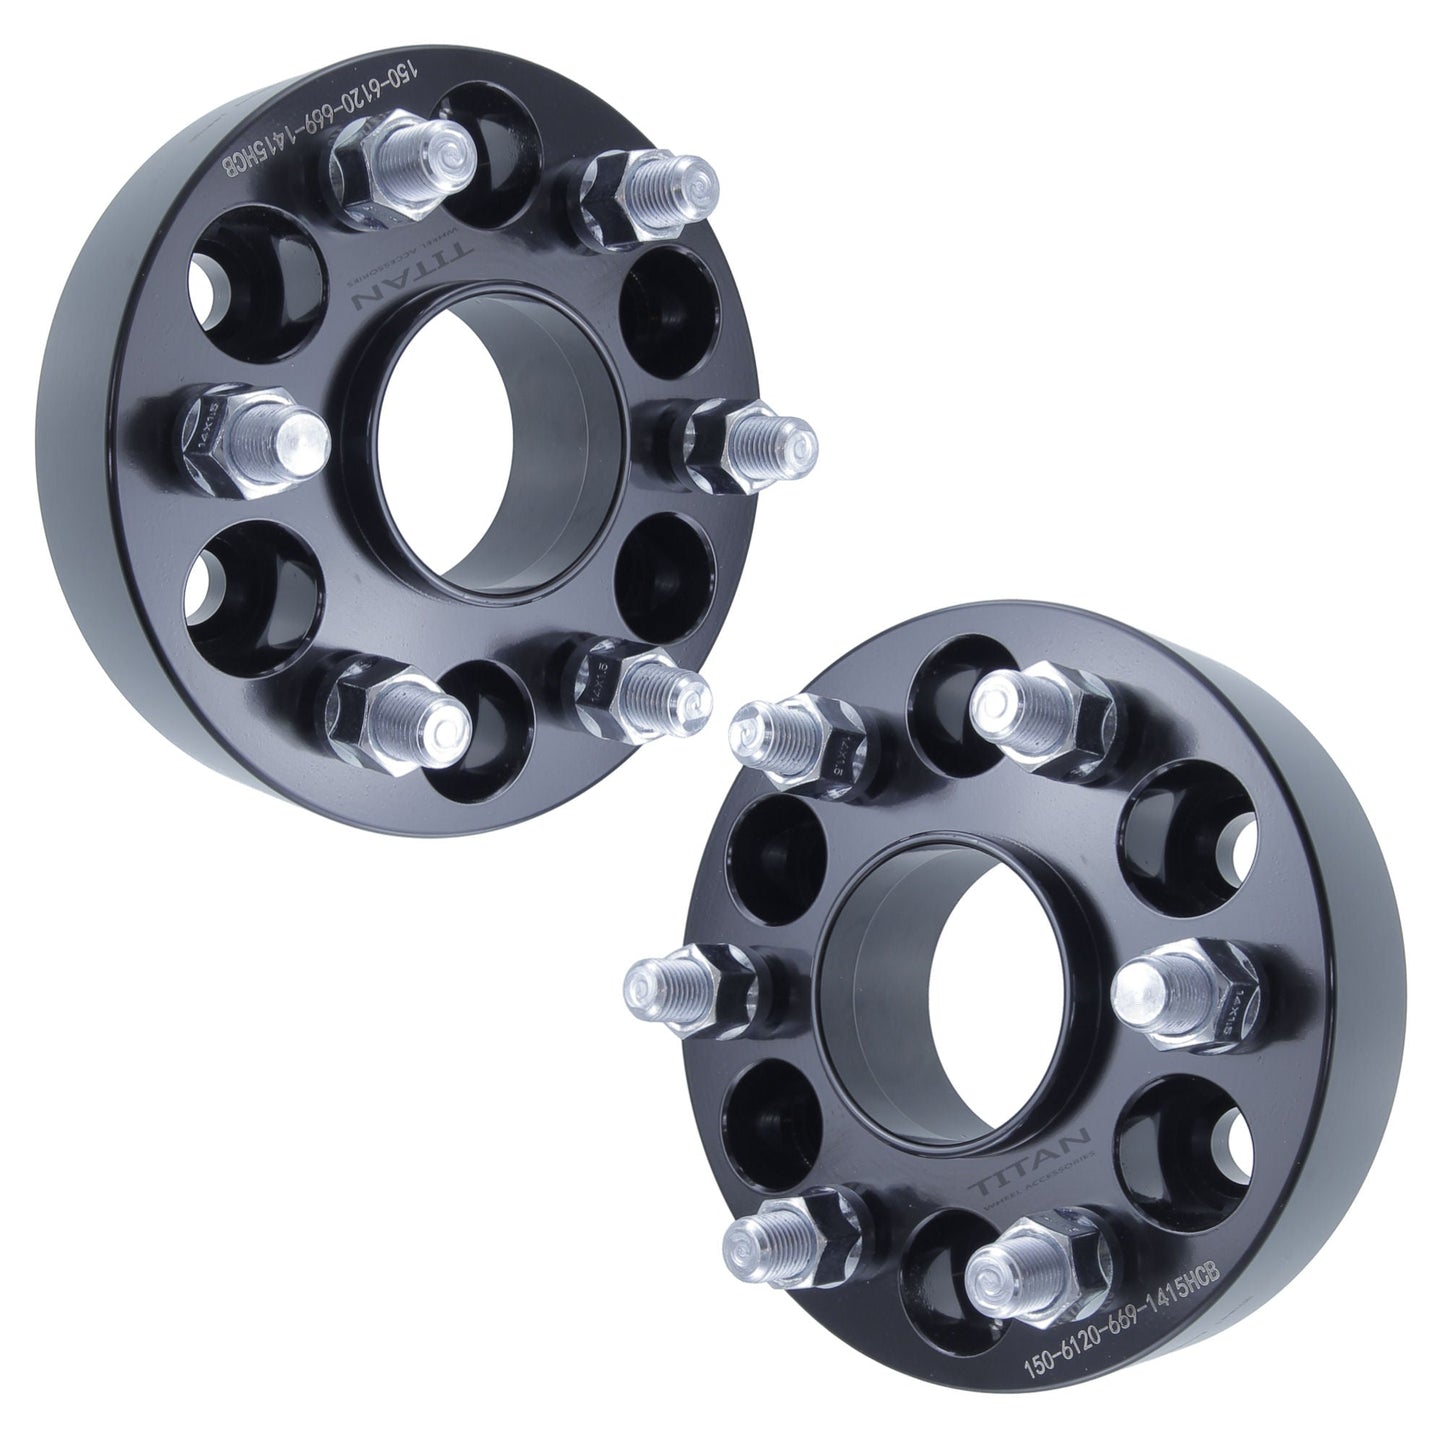 2" (50mm) Titan Wheel Spacers for GMC Canton Chevy Colorado | 6x120 | 66.9 Hubcentric |14x1.5 Studs |  Set of 4 | Titan Wheel Accessories